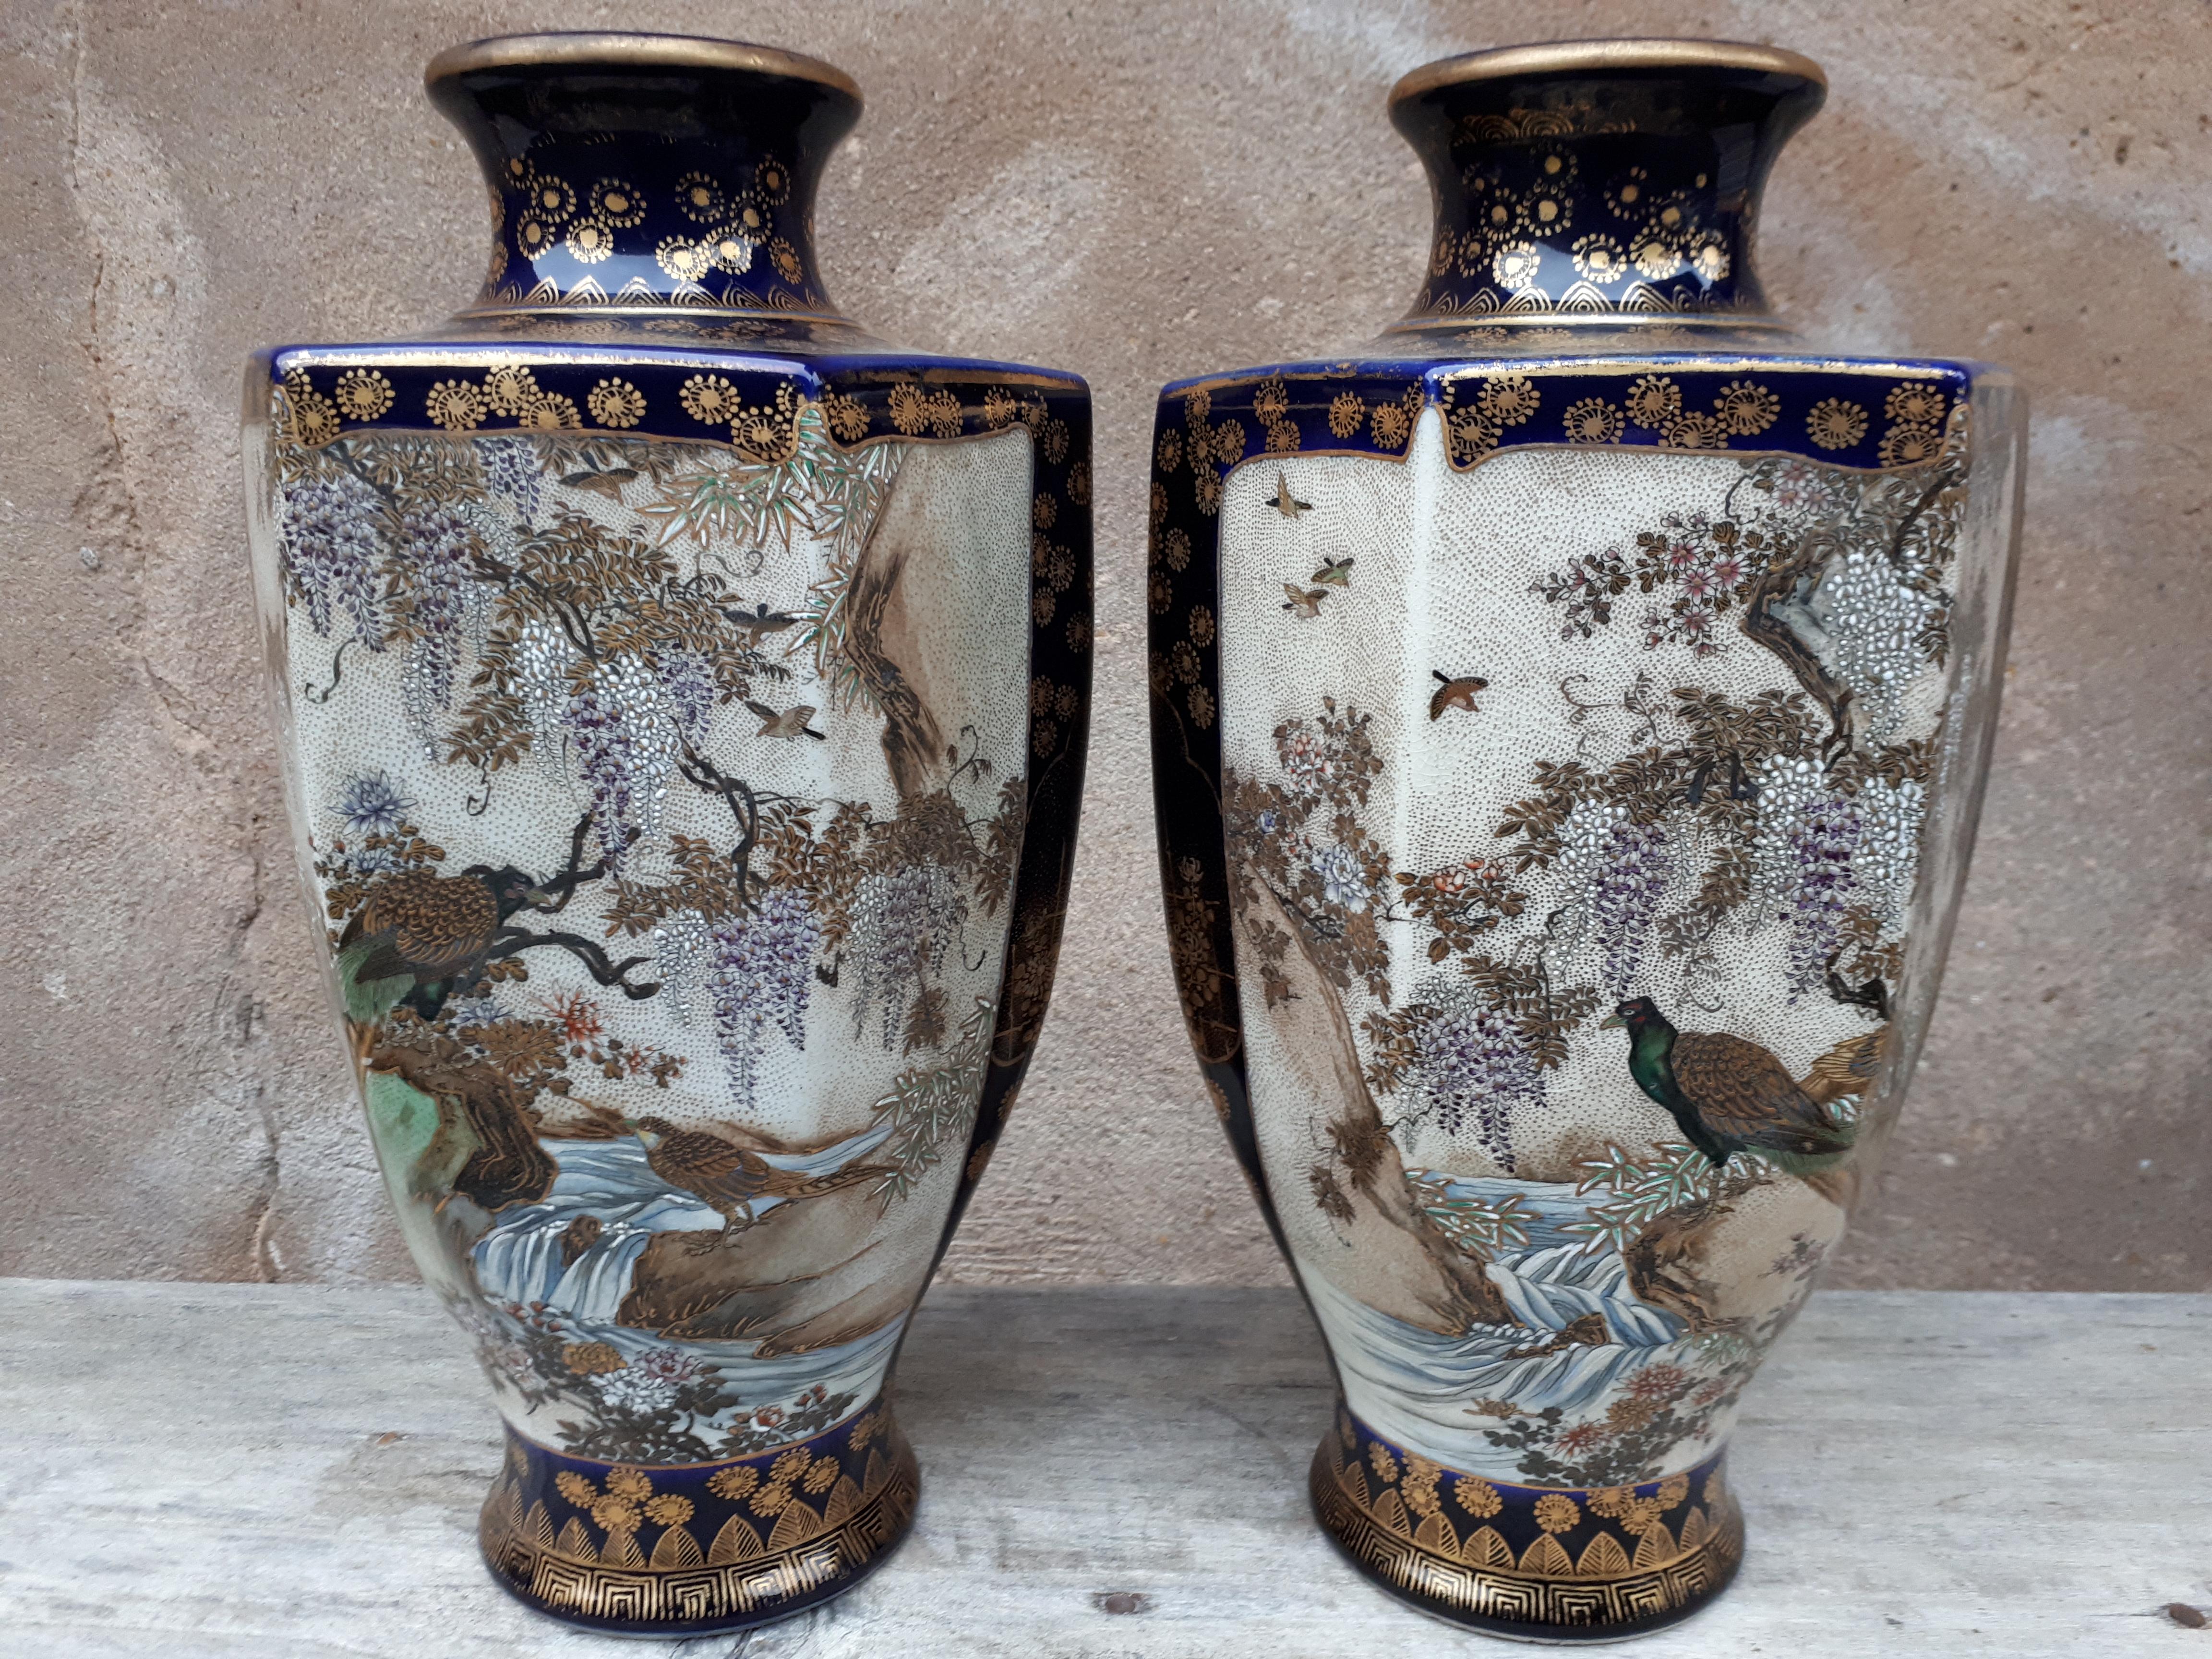 Extremely rare pair of hexagonal Satsuma earthenware vases, with decorations in reserve of birds and landscapes on a blue background enhanced with gold. Signed 